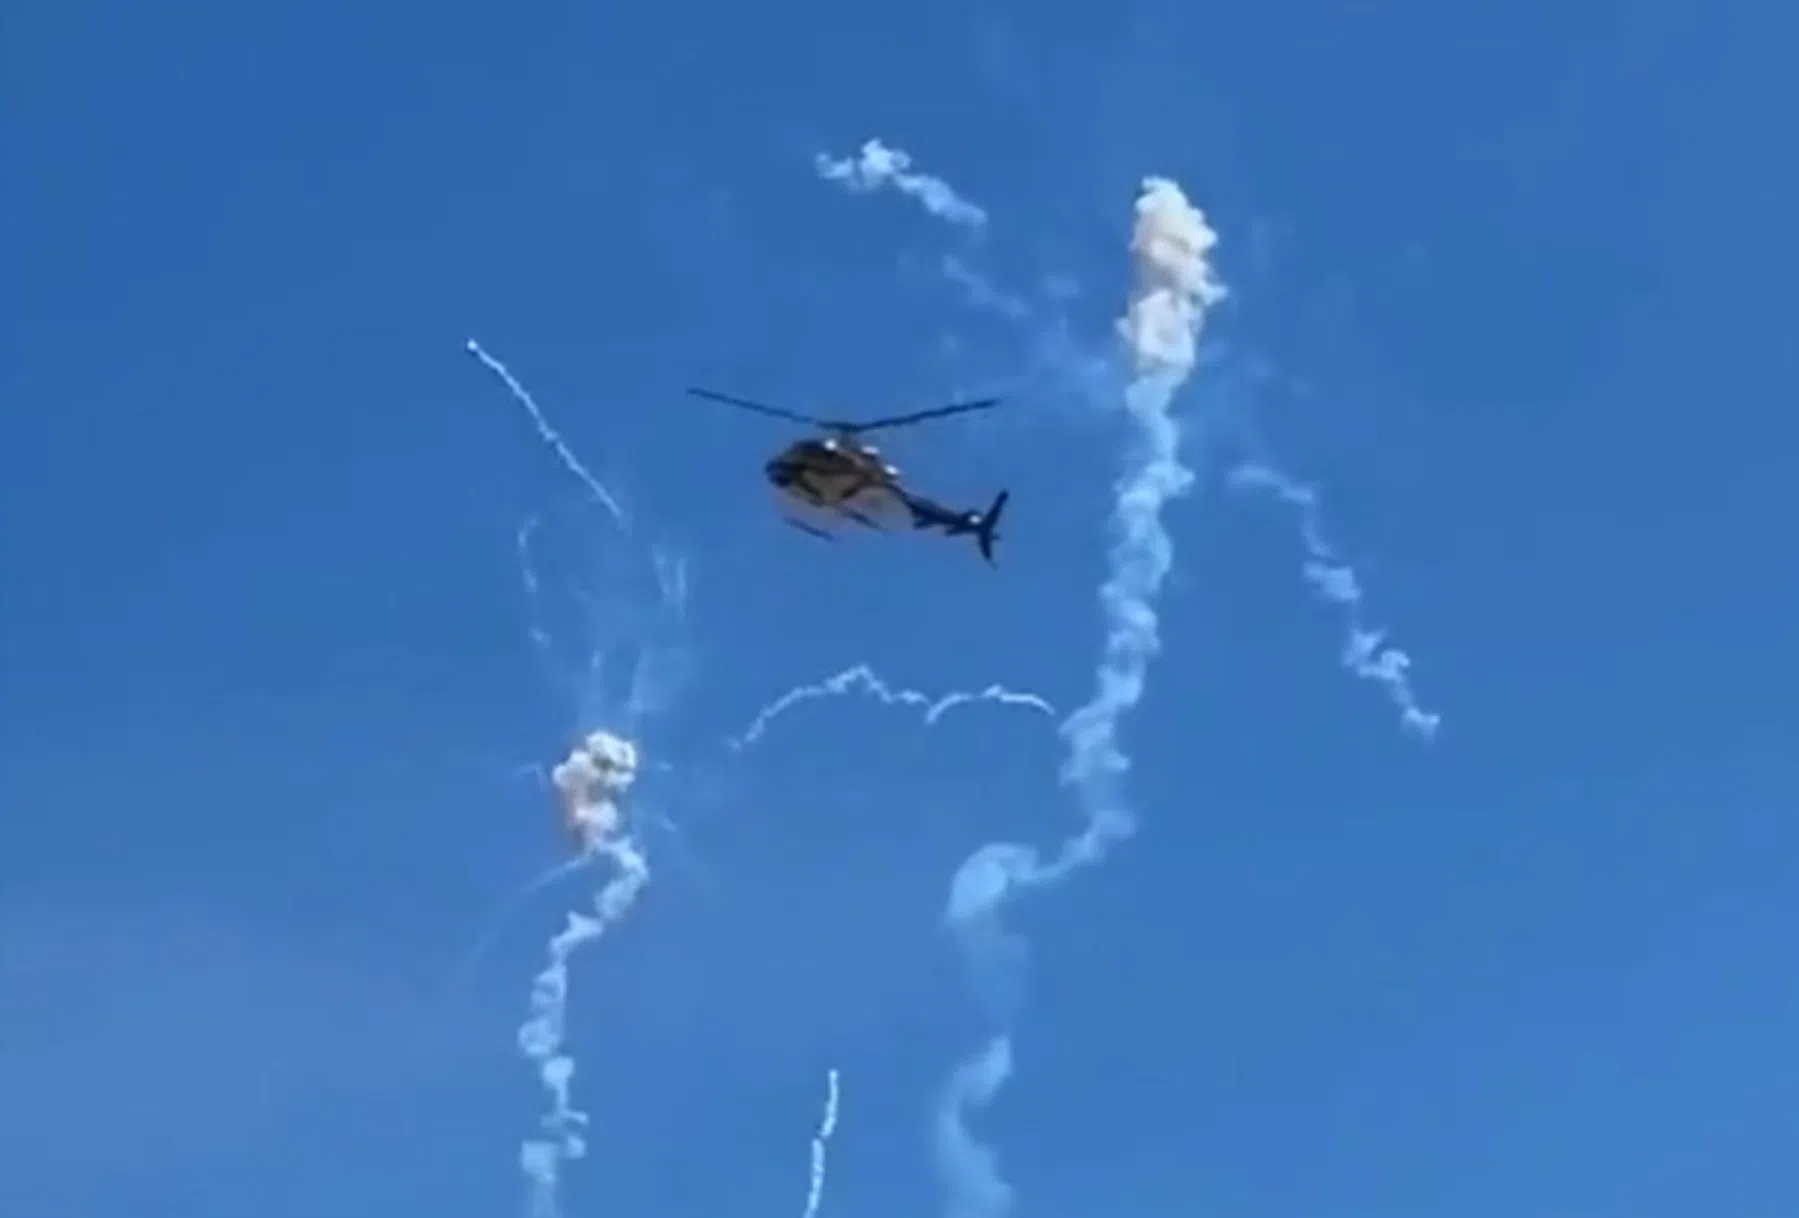  F1 helicopter only just managed to avoid fireworks over COTA